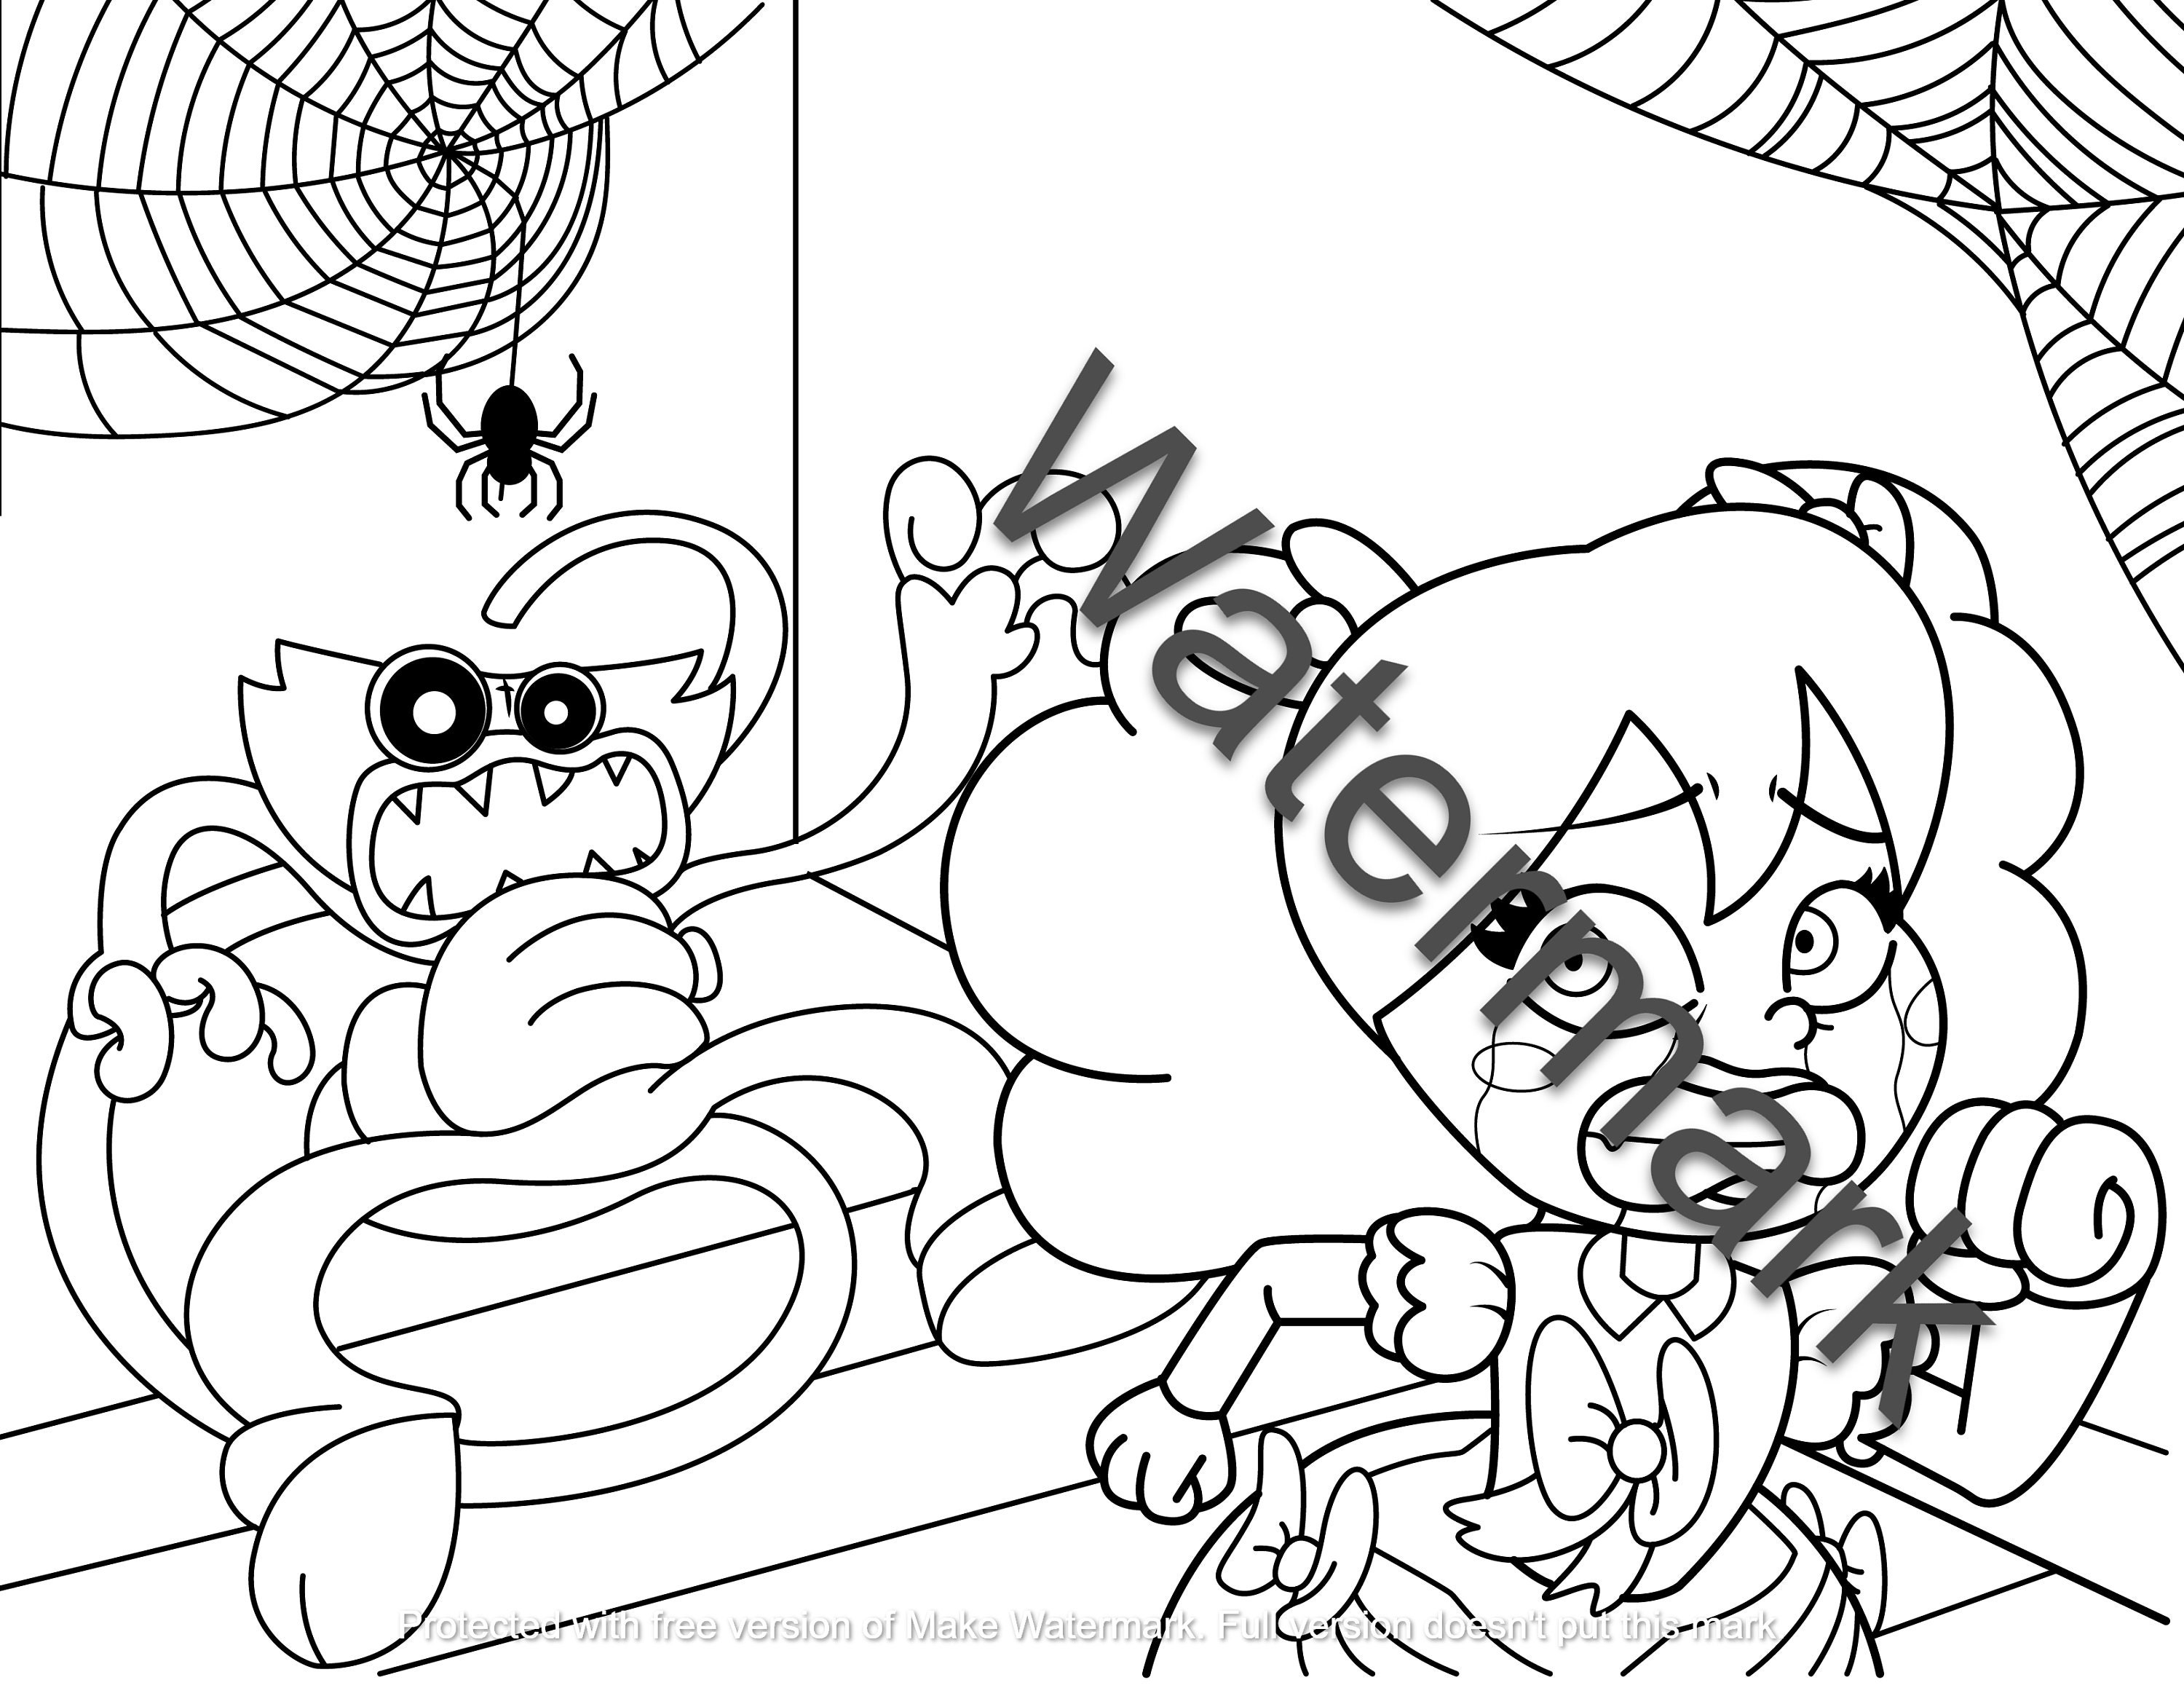 Poppys playtime huggy wuggy coloring page digital print instant download